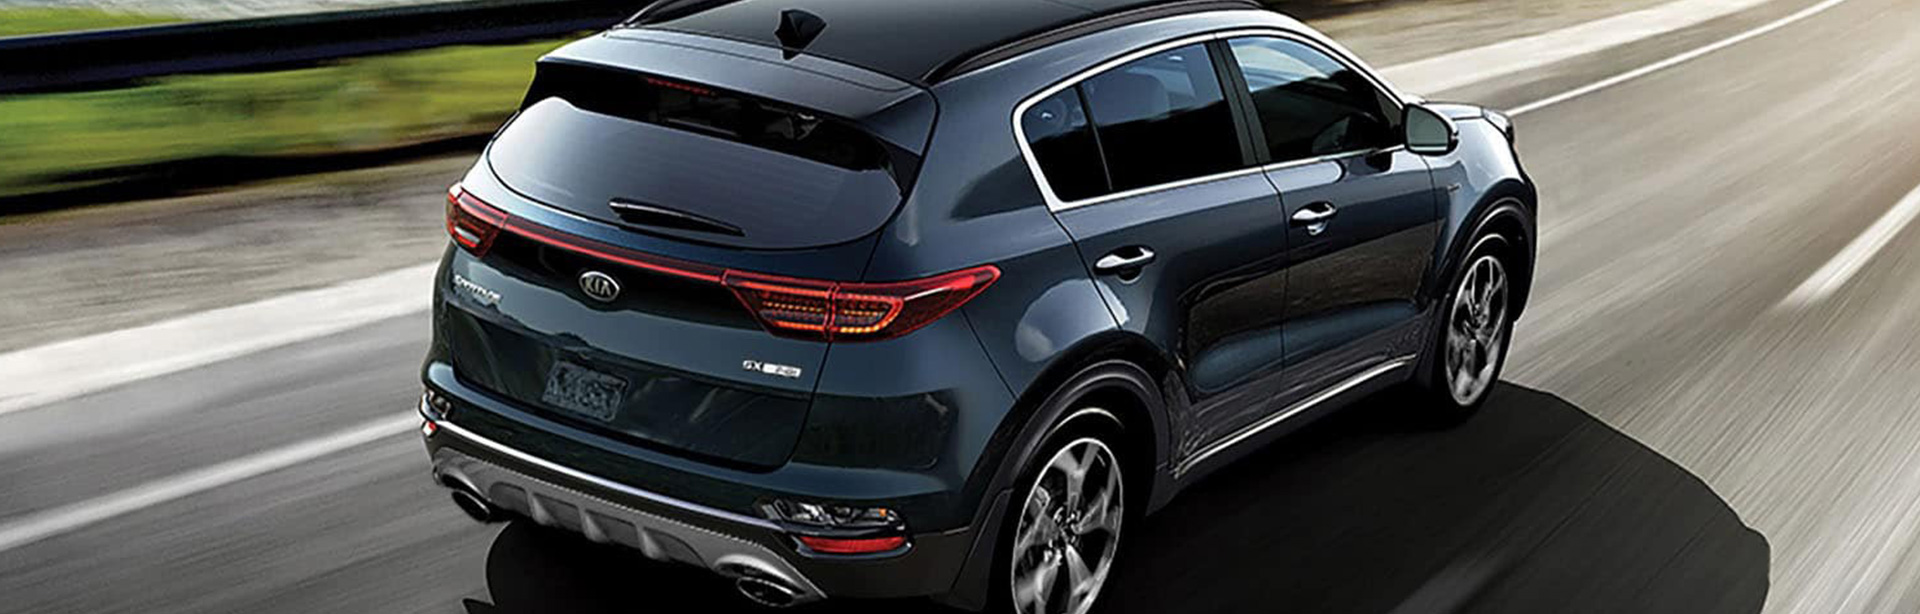 Up Close and Personal With the 2022 Kia Sportage – Monroeville Kia Blog